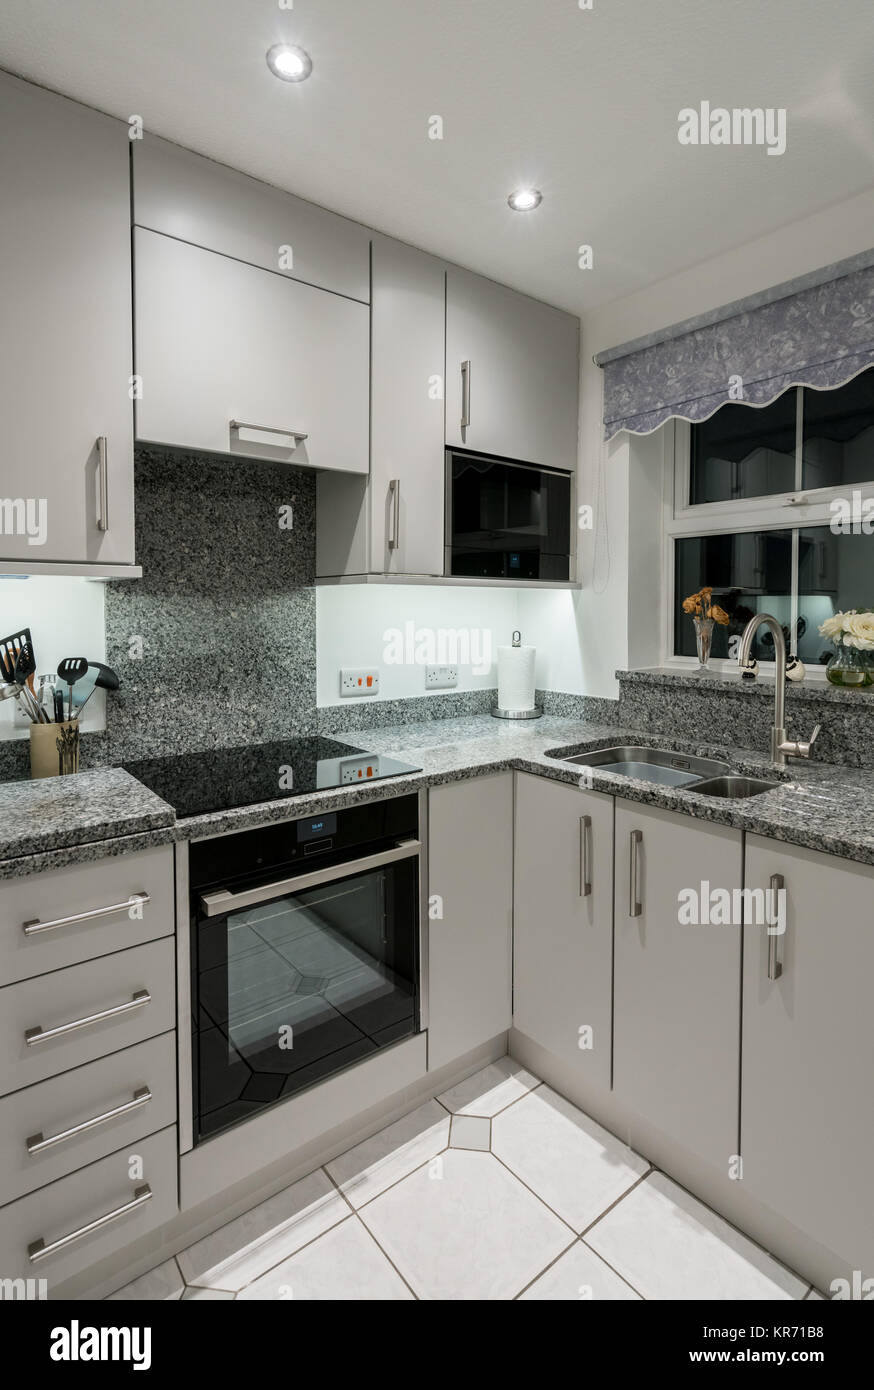 Small modern kitchen in apartment with granite worktop Stock Photo